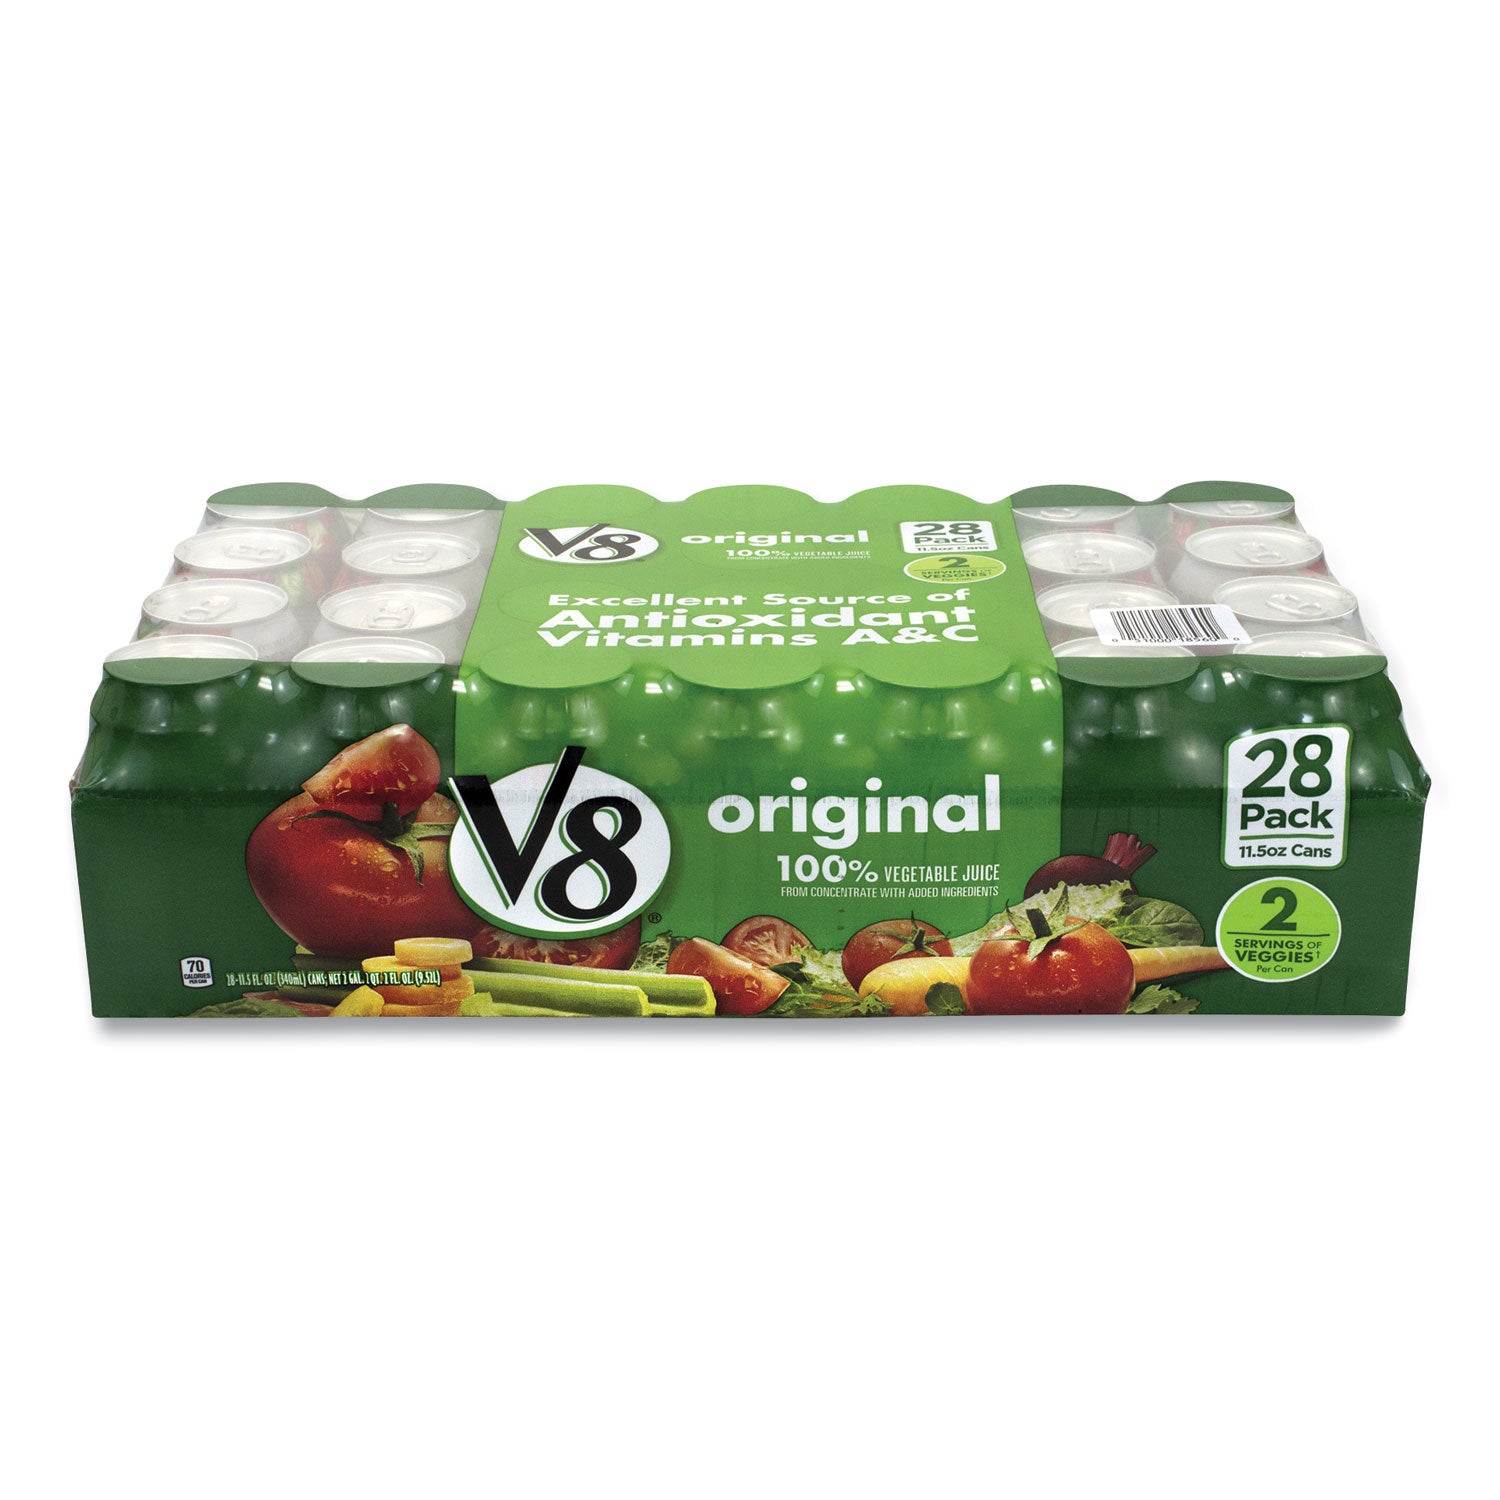 vegetable-juice-115-oz-can-28-carton-ships-in-1-3-business-days_grr90000092 - 1